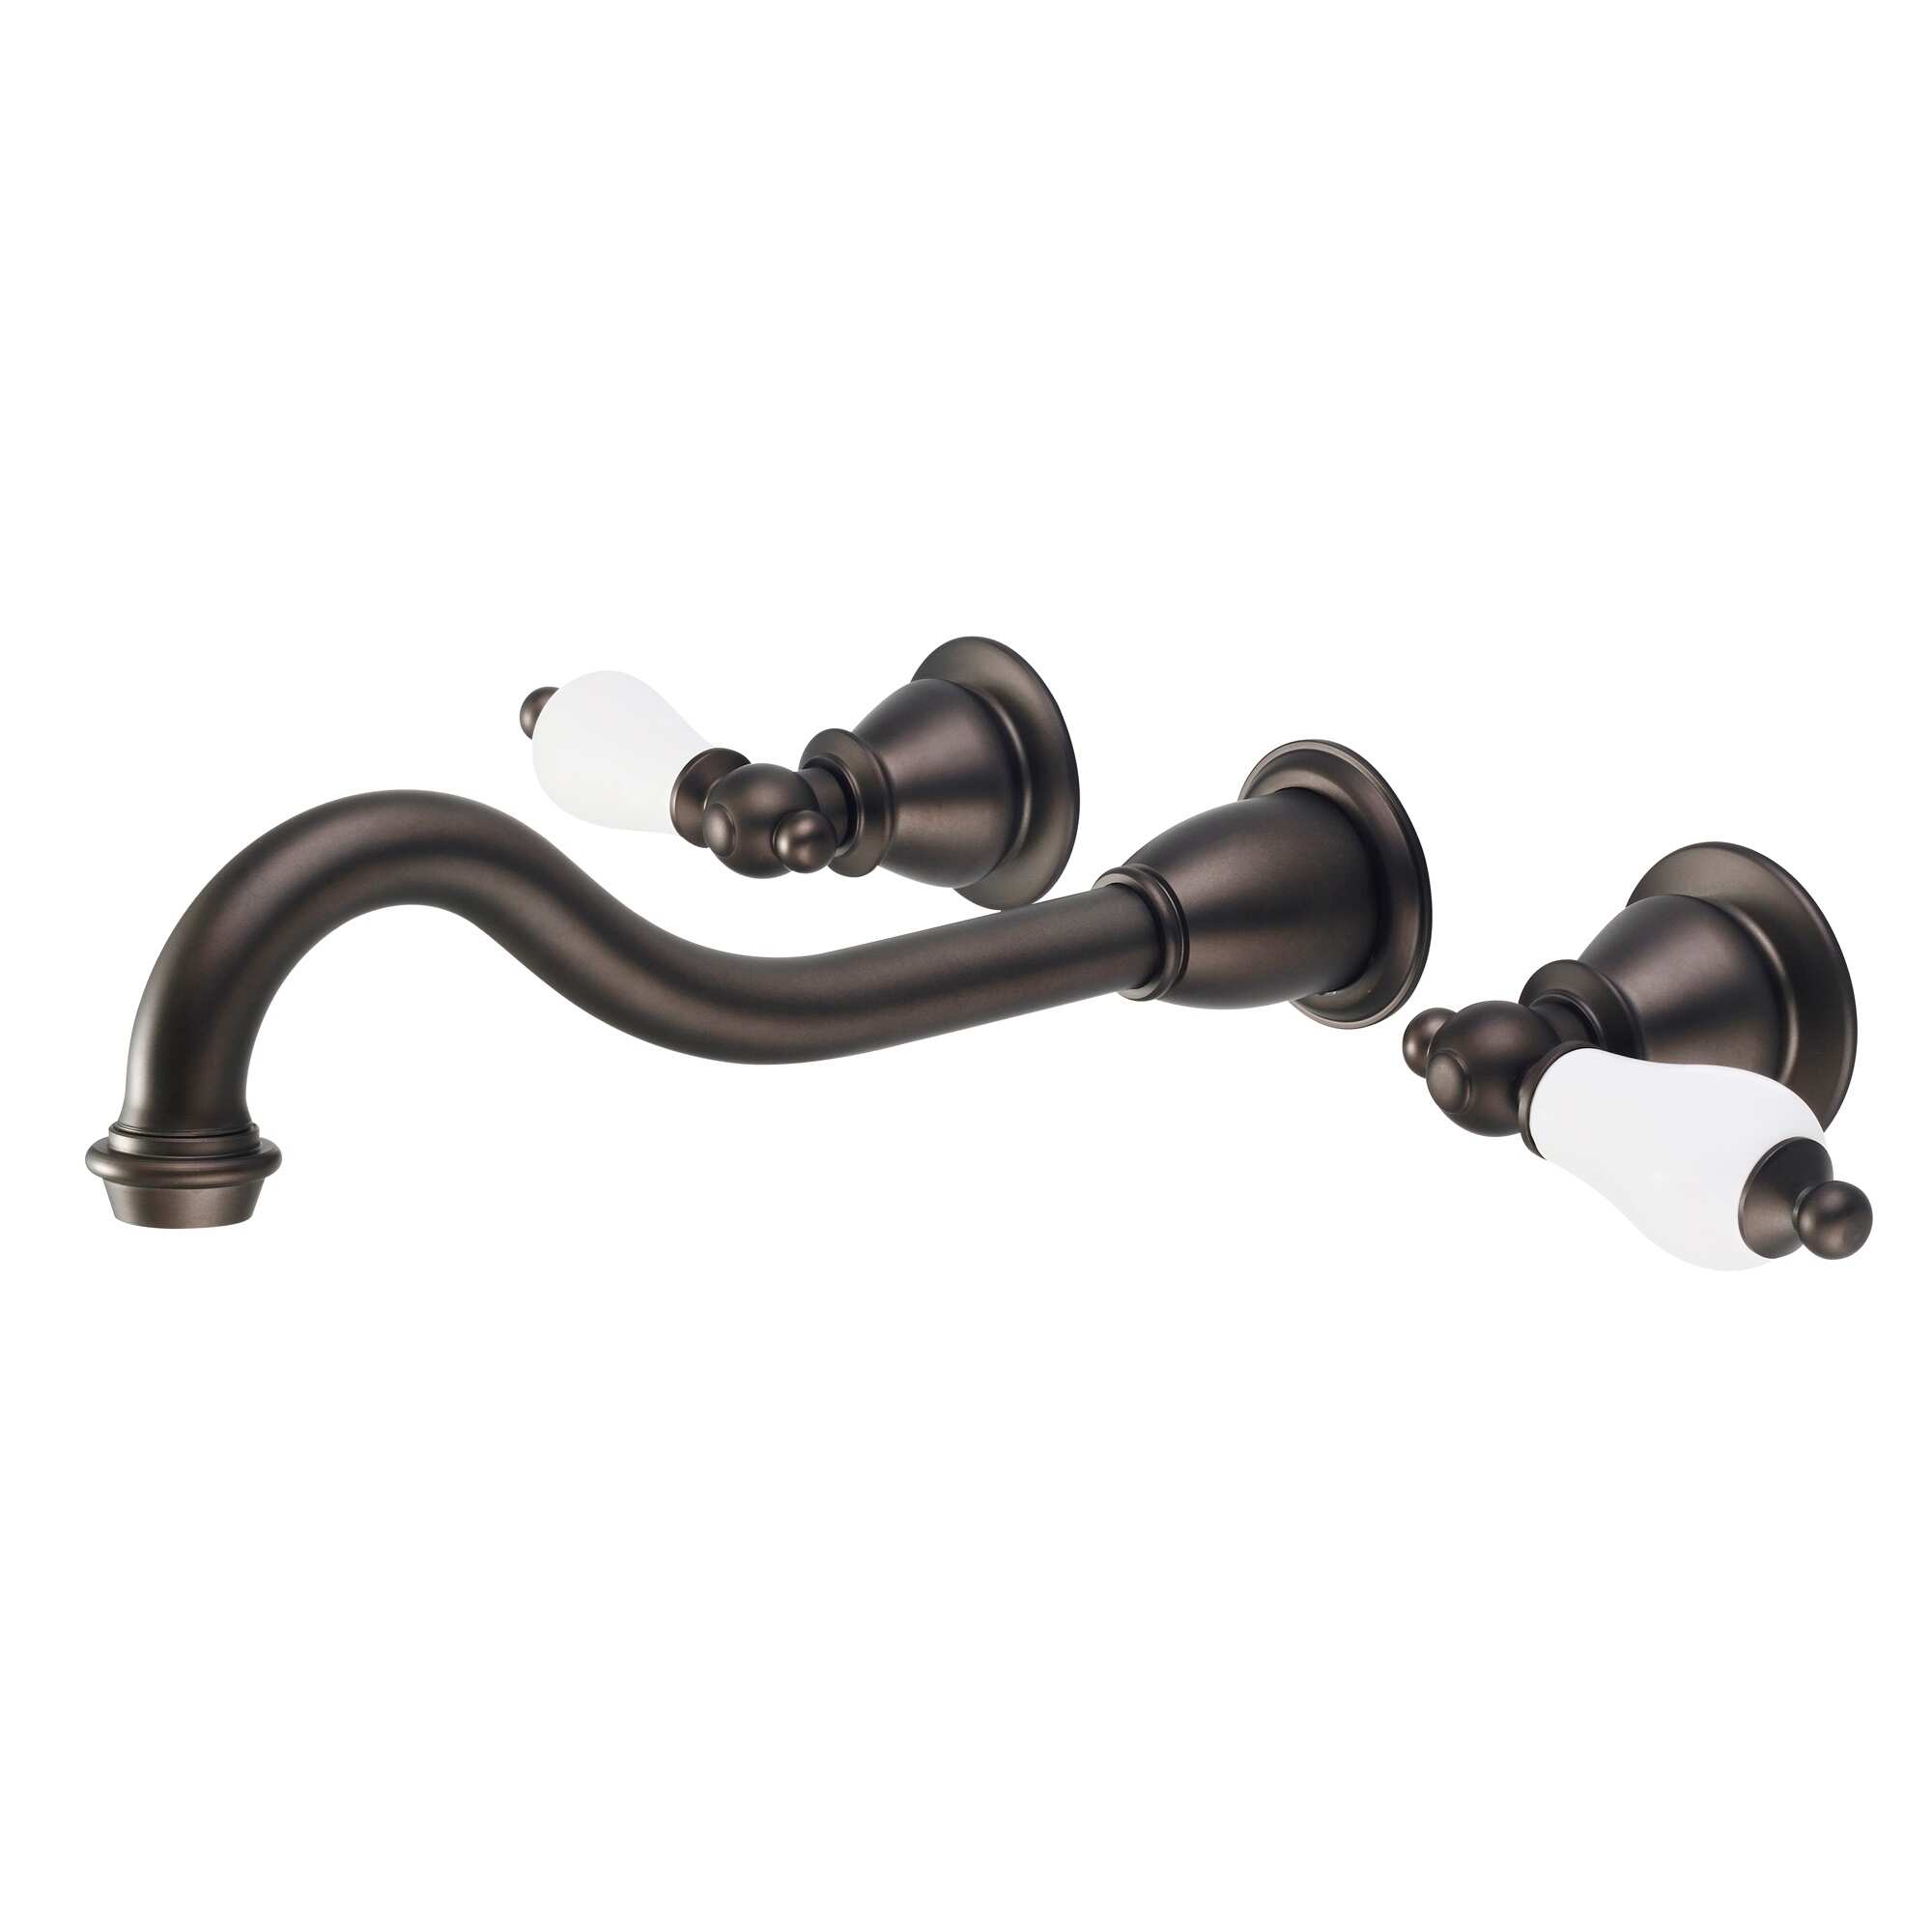 Water Creation Elegant Spout Wall Mount Vessel/Lavatory Faucet in Oil Rubbed Bronze Finish - Lever Handles